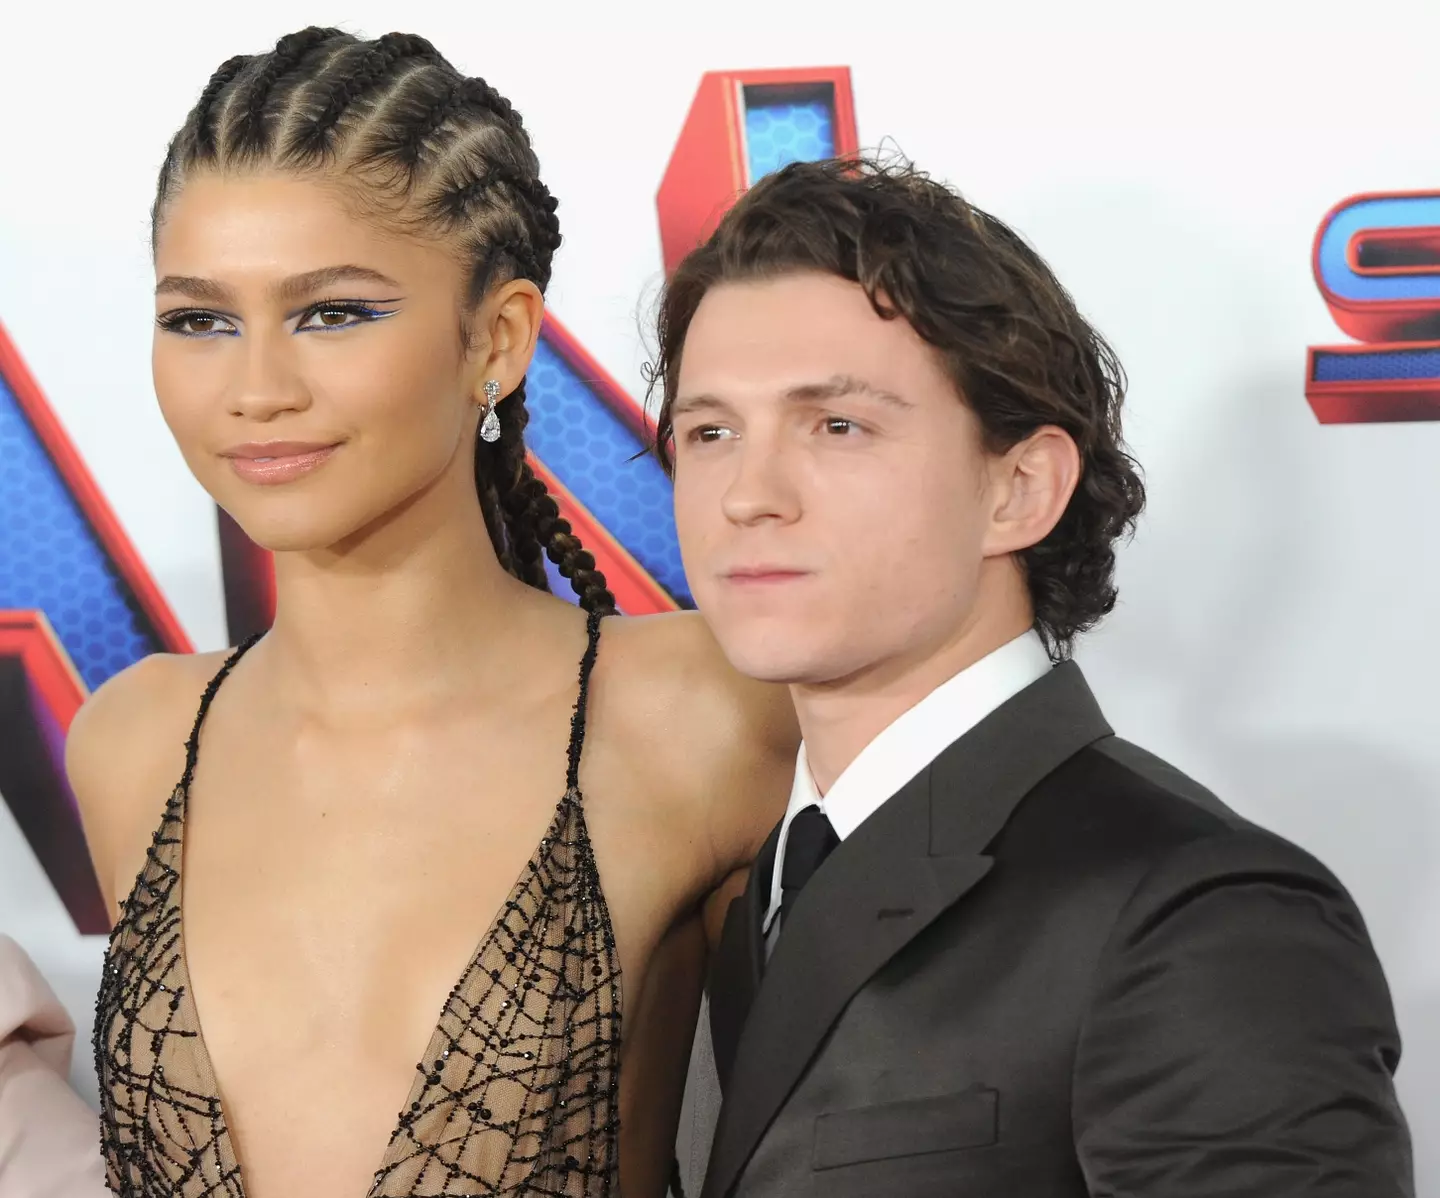 Tom Holland and Zendaya's relationship was made public in 2021 when they were photographed kissing in a car.